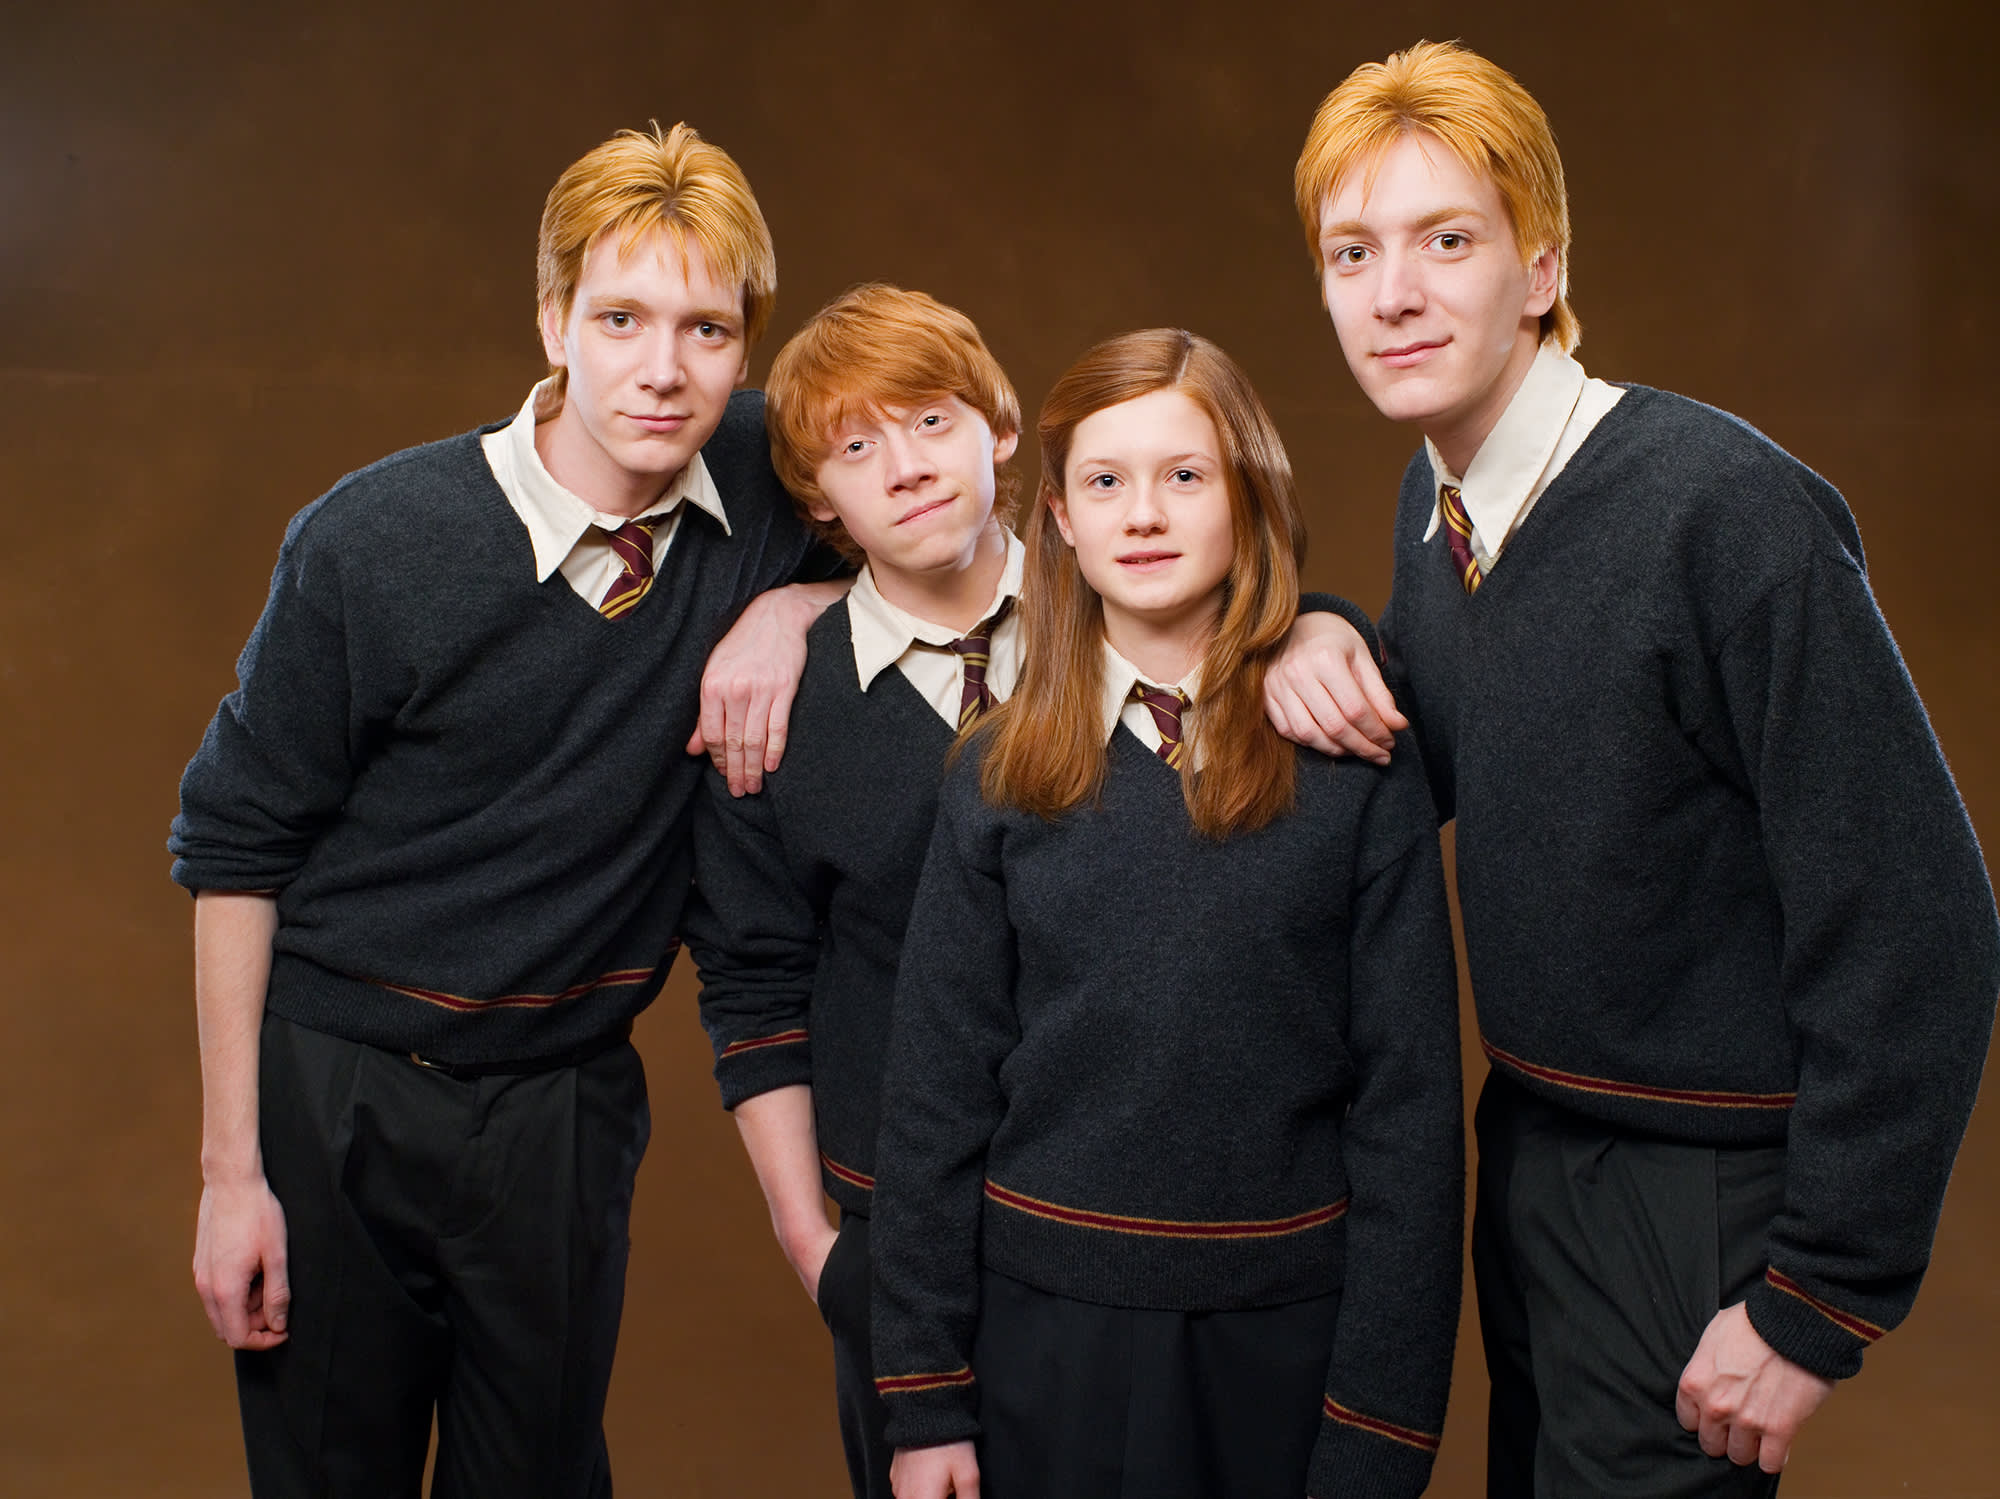 HP-F5-order-of-the-phoenix-ginny-fred-george-ron-posing-web-landscape